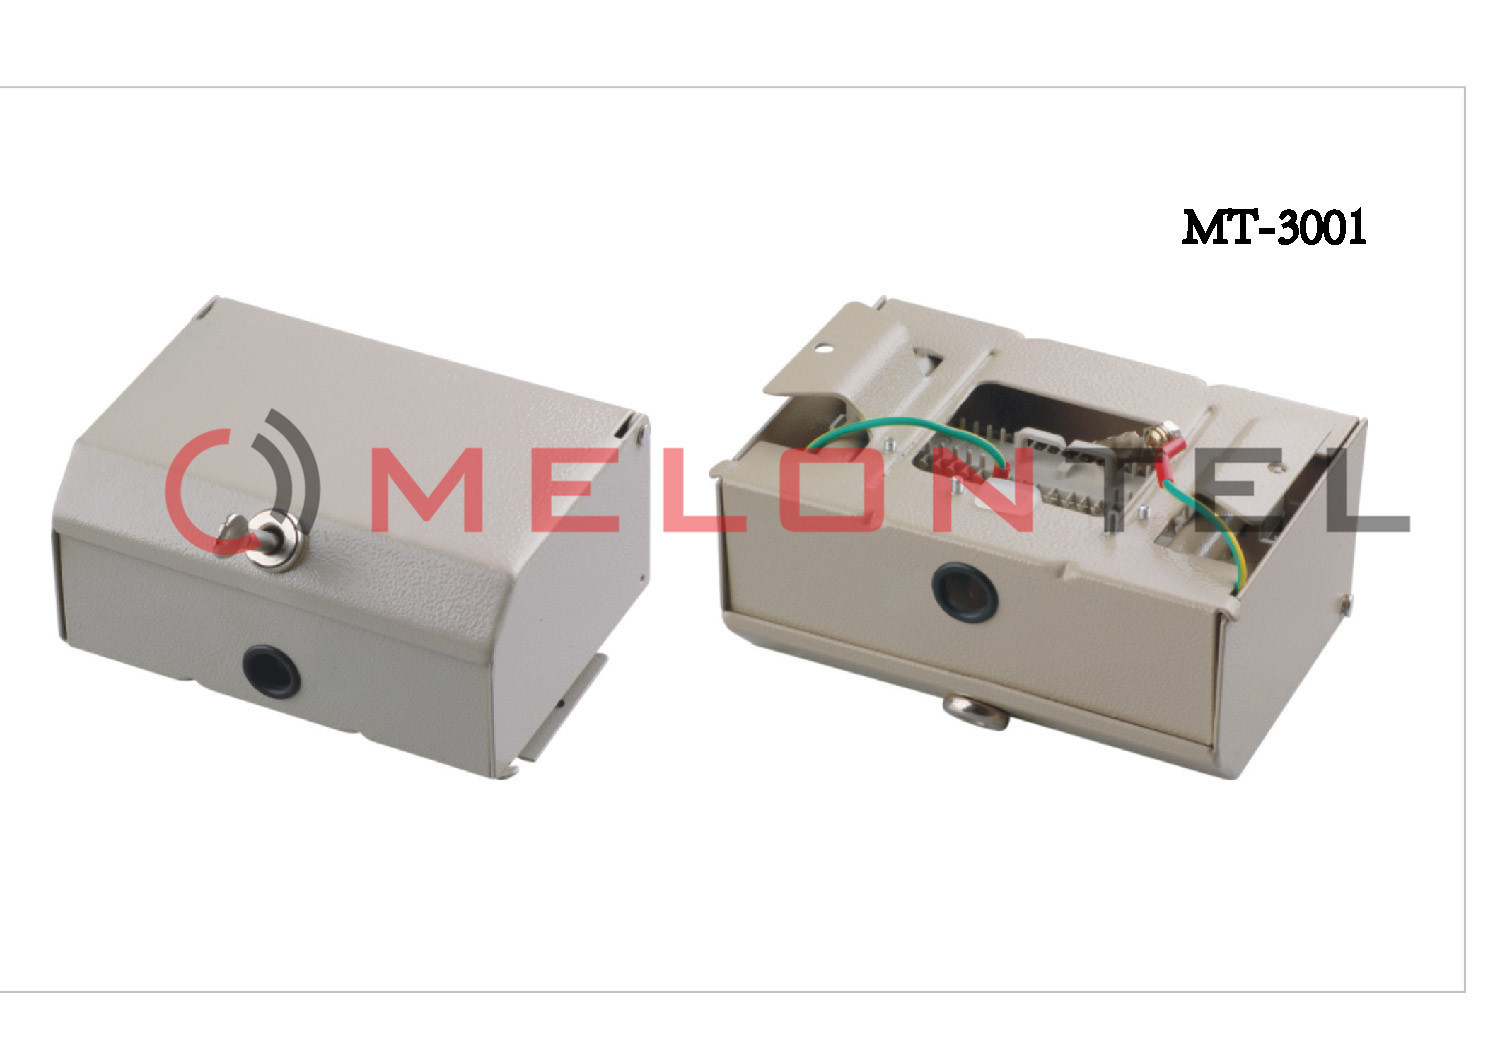 Best 10 20 Pair Telephone Network Distribution Box SPCC Material With Stainless Steel Rails wholesale